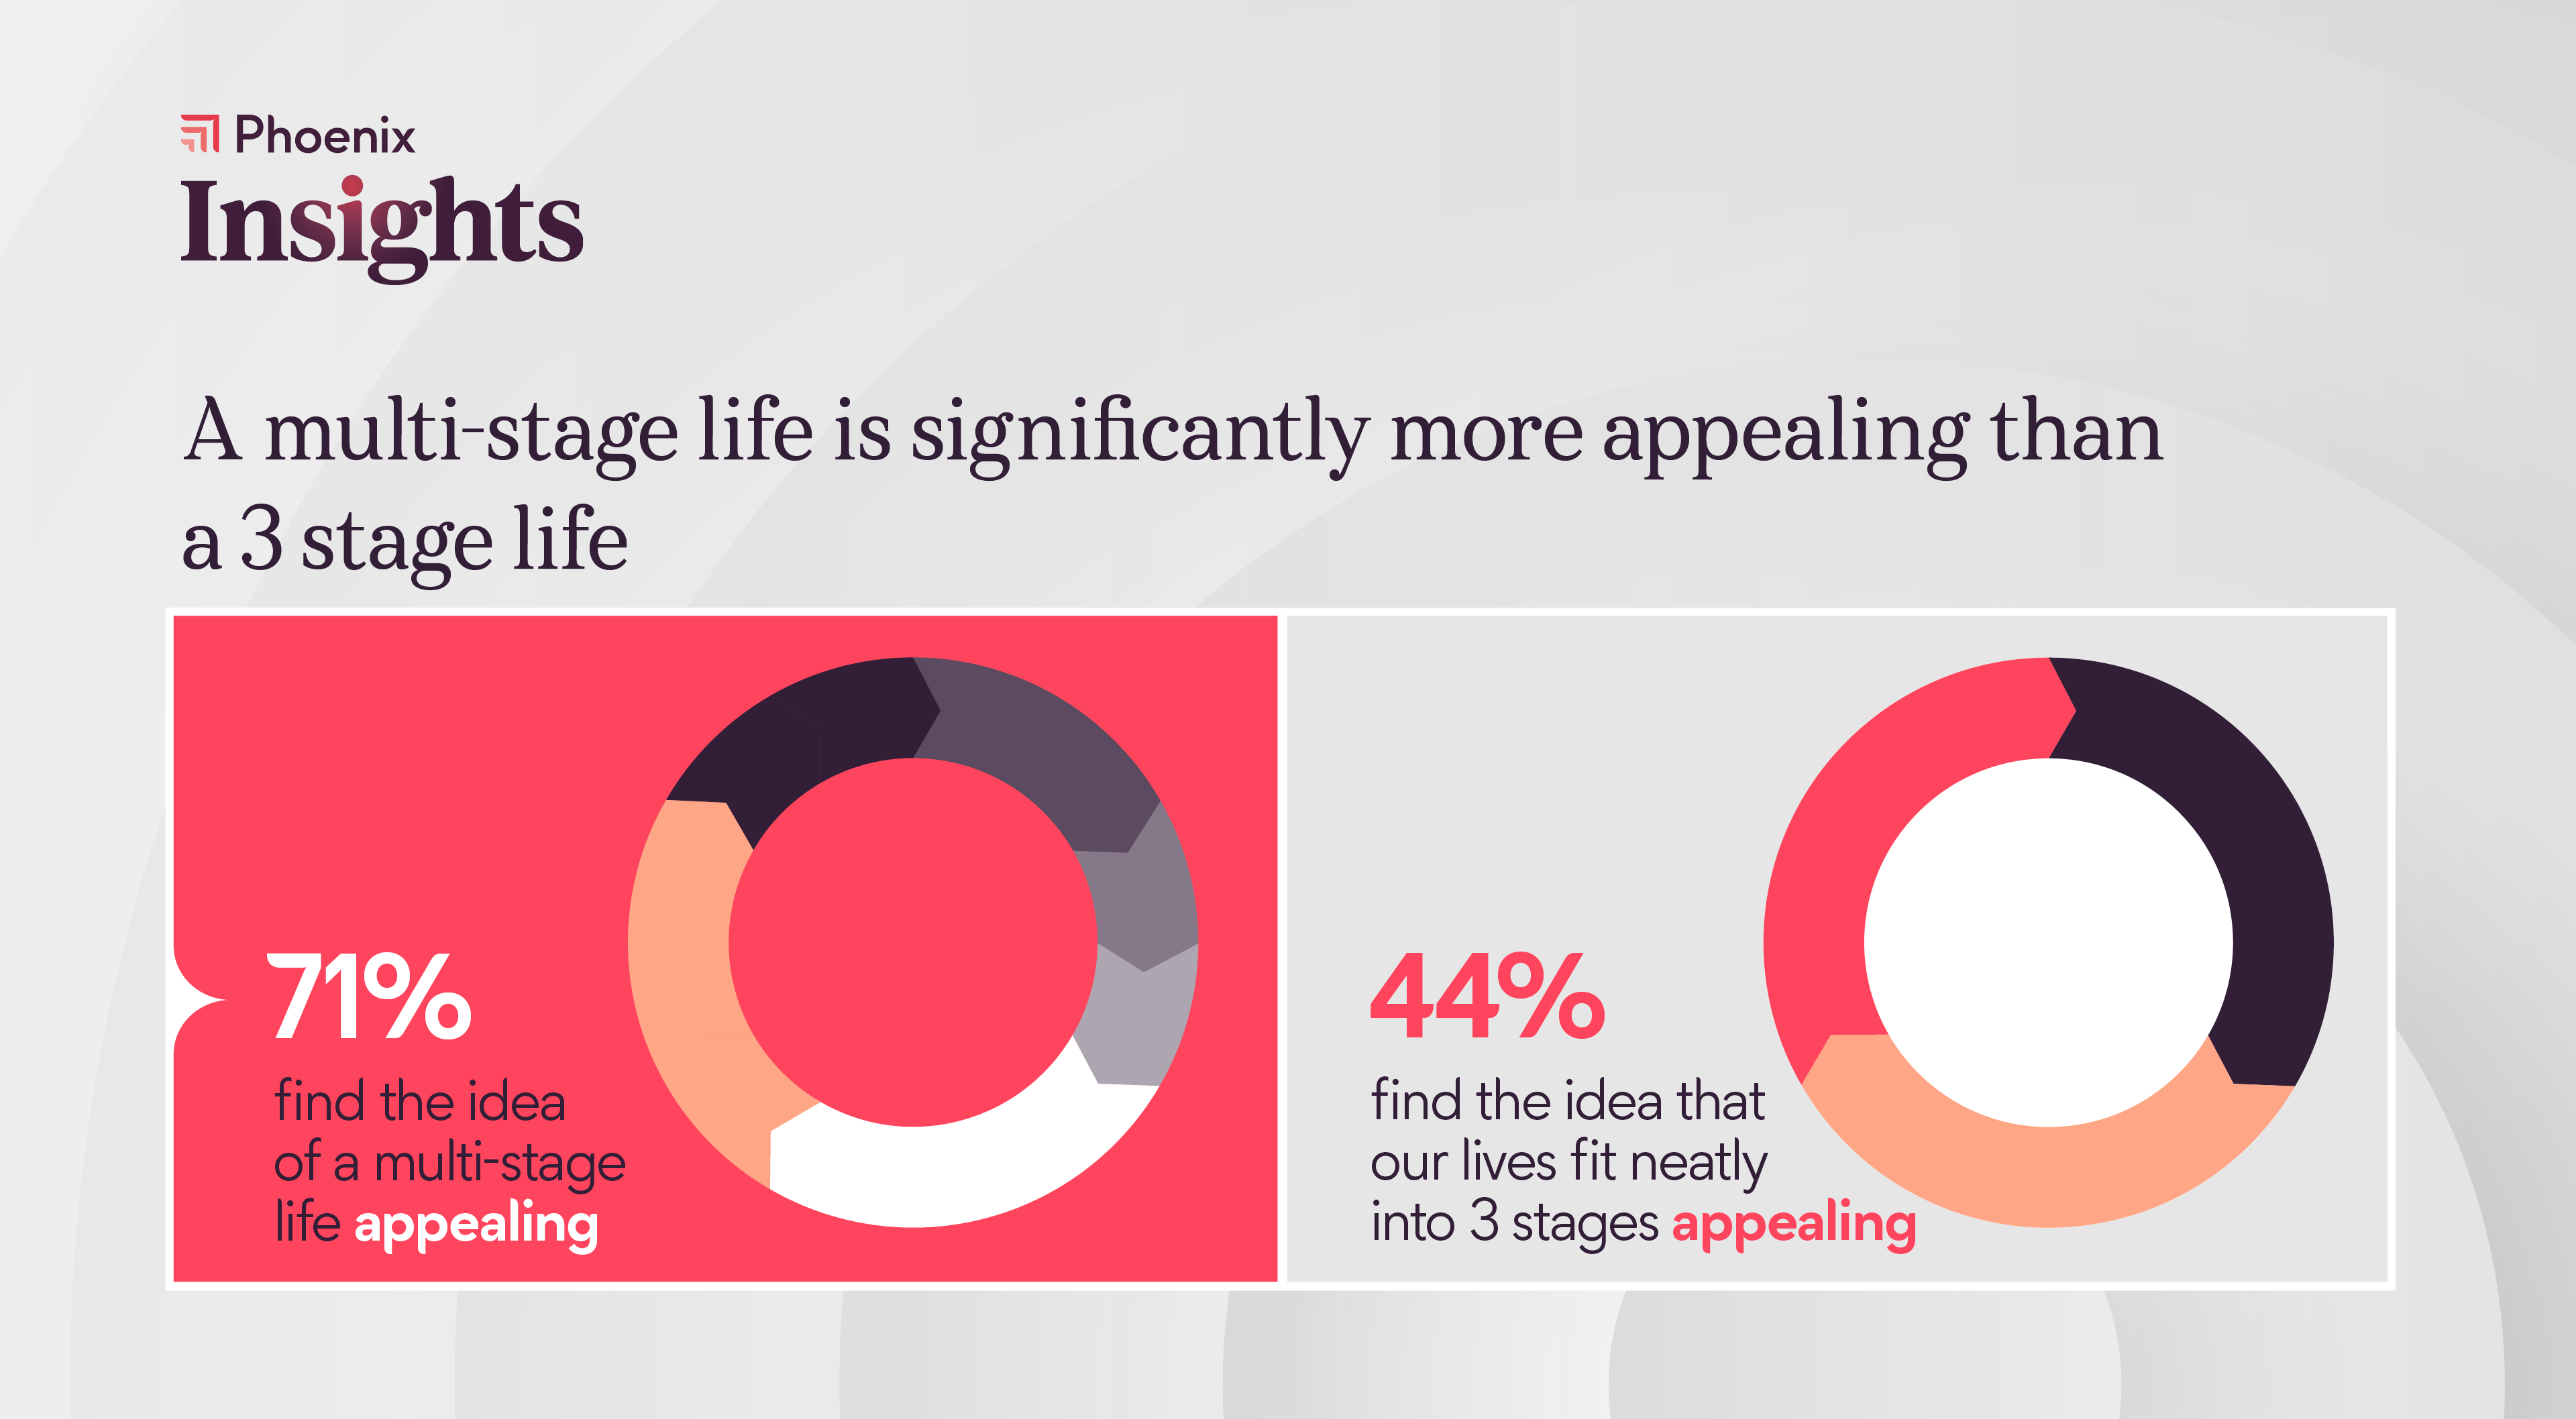 Our research shows a multi-stage life is significantly more appealing than a 3 stage life. 71% of people find the idea of a multi-stage life while only 44% find the idea that our lives fit neatly into 3 stages appealing. 